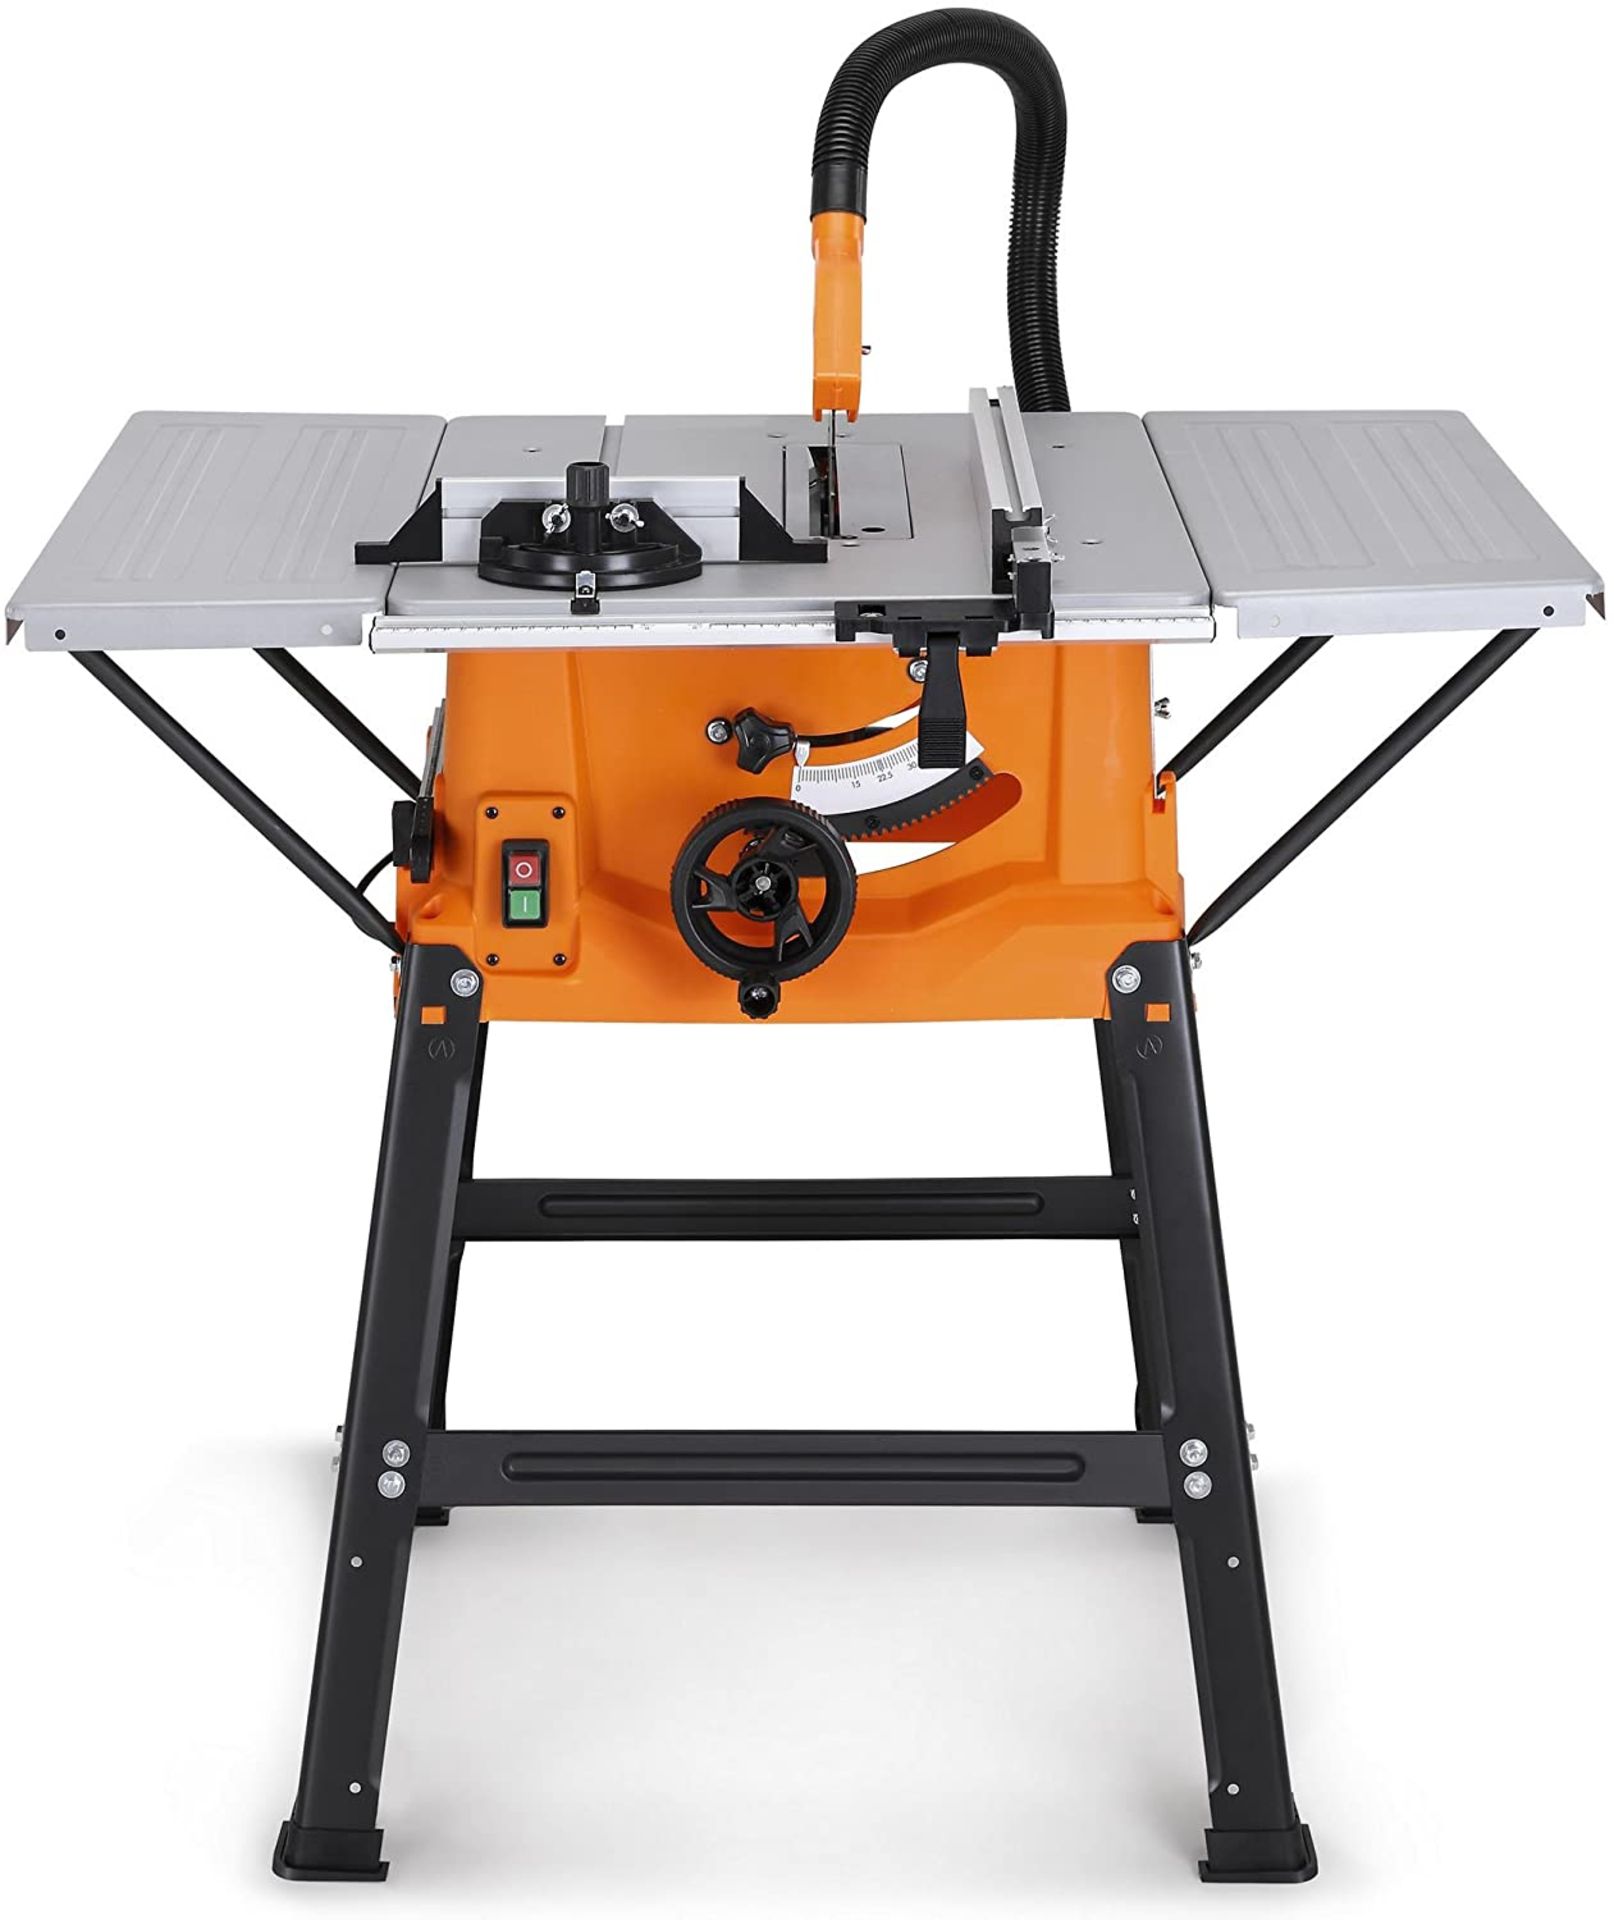 (VL12) Table Saw - Circular Saw Function 1800W 10” (250mm) with 5500rpm Underframe – High S... - Image 3 of 3